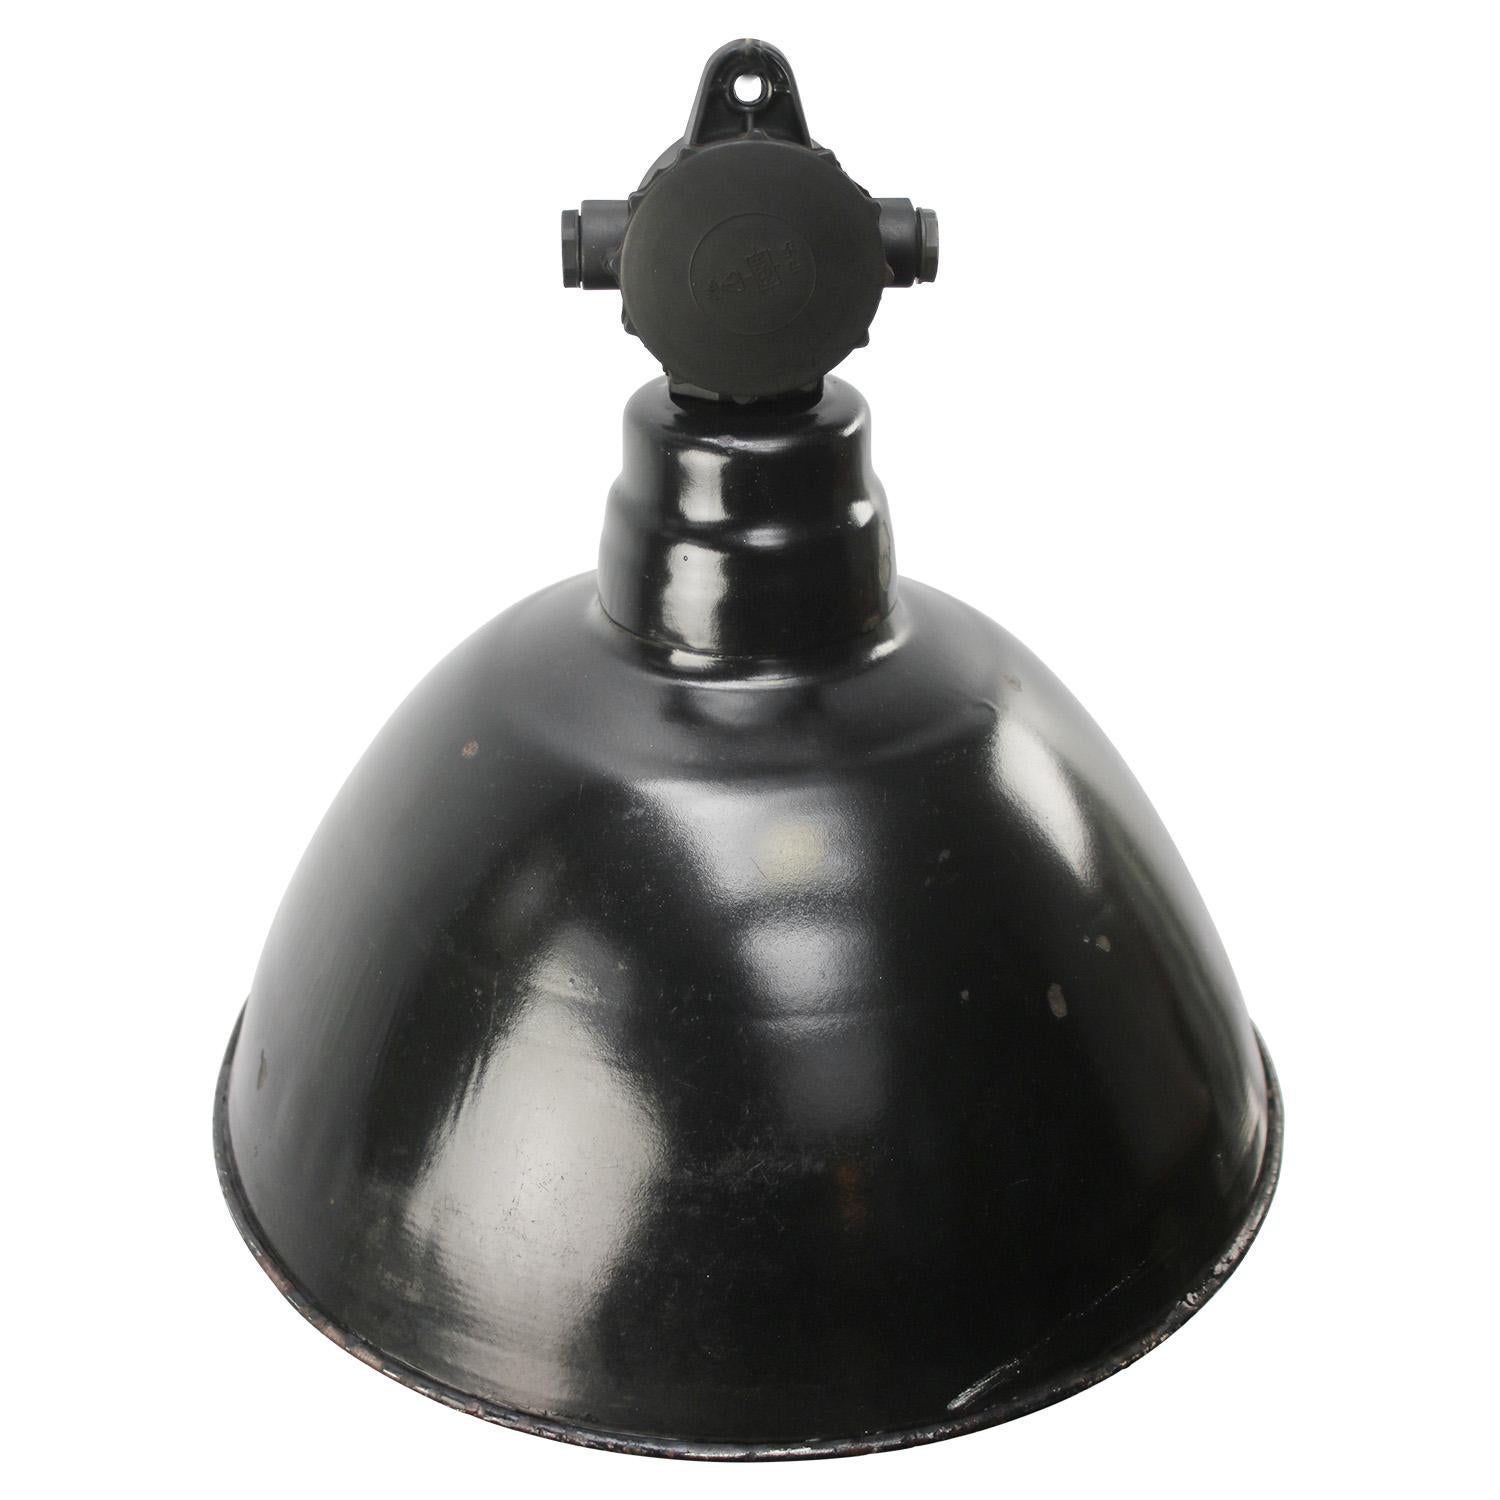 Vintage German industrial pendant light.
Used in warehouses and factories in Germany.
Black enamel top with Bakelite top.

Weight: 2.2 kg / 4.9 lb

Priced per individual item. All lamps have been made suitable by international standards for